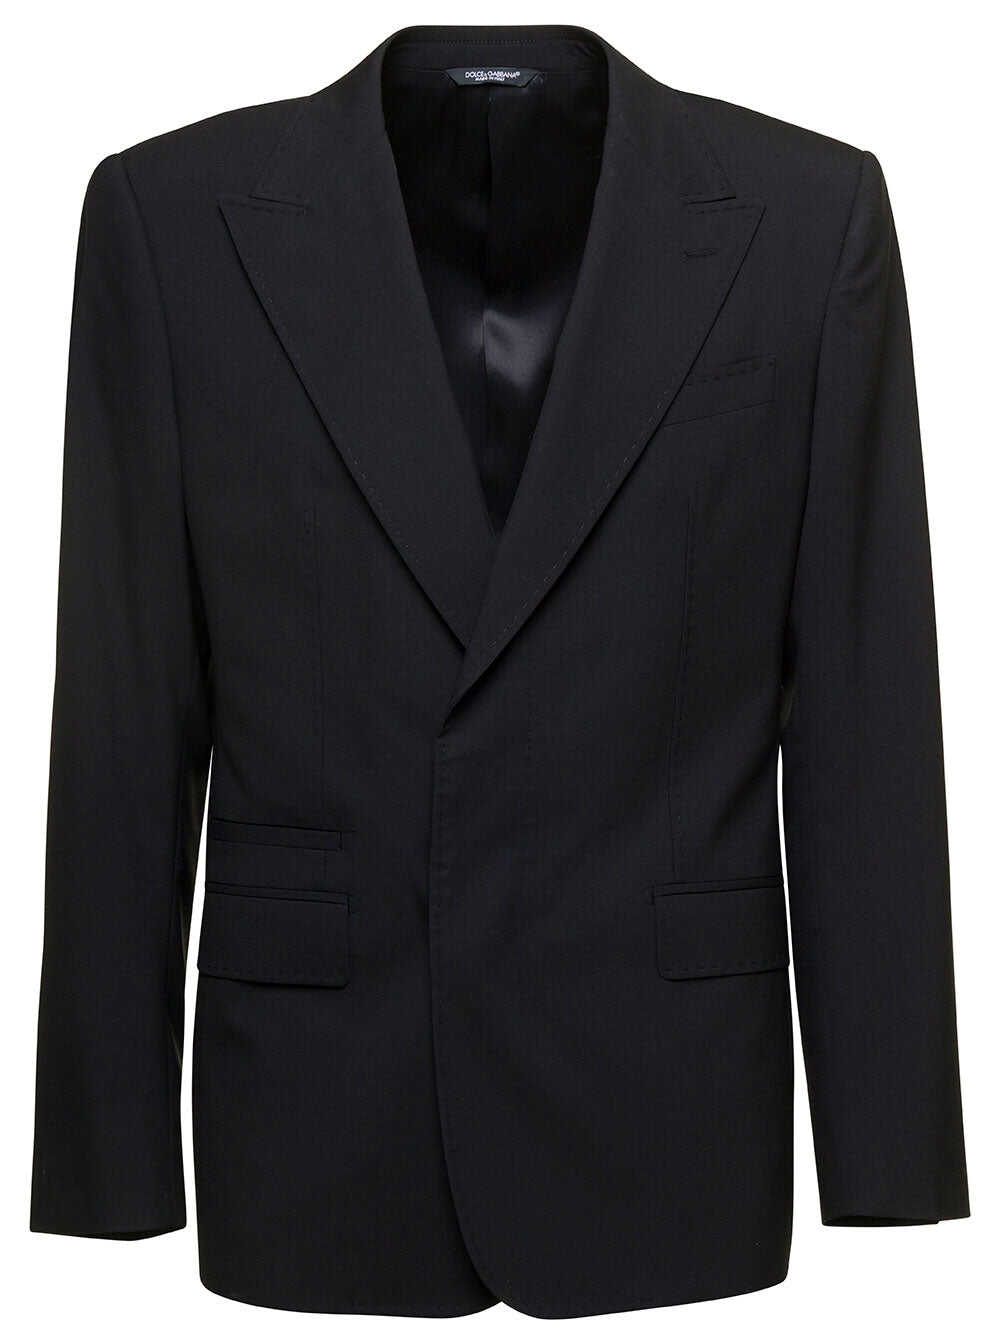 Dolce & Gabbana \'New Sicilia\' Black Single-Breasted Jacket with Concelaed Fastening in Stretch Wool Man BLACK